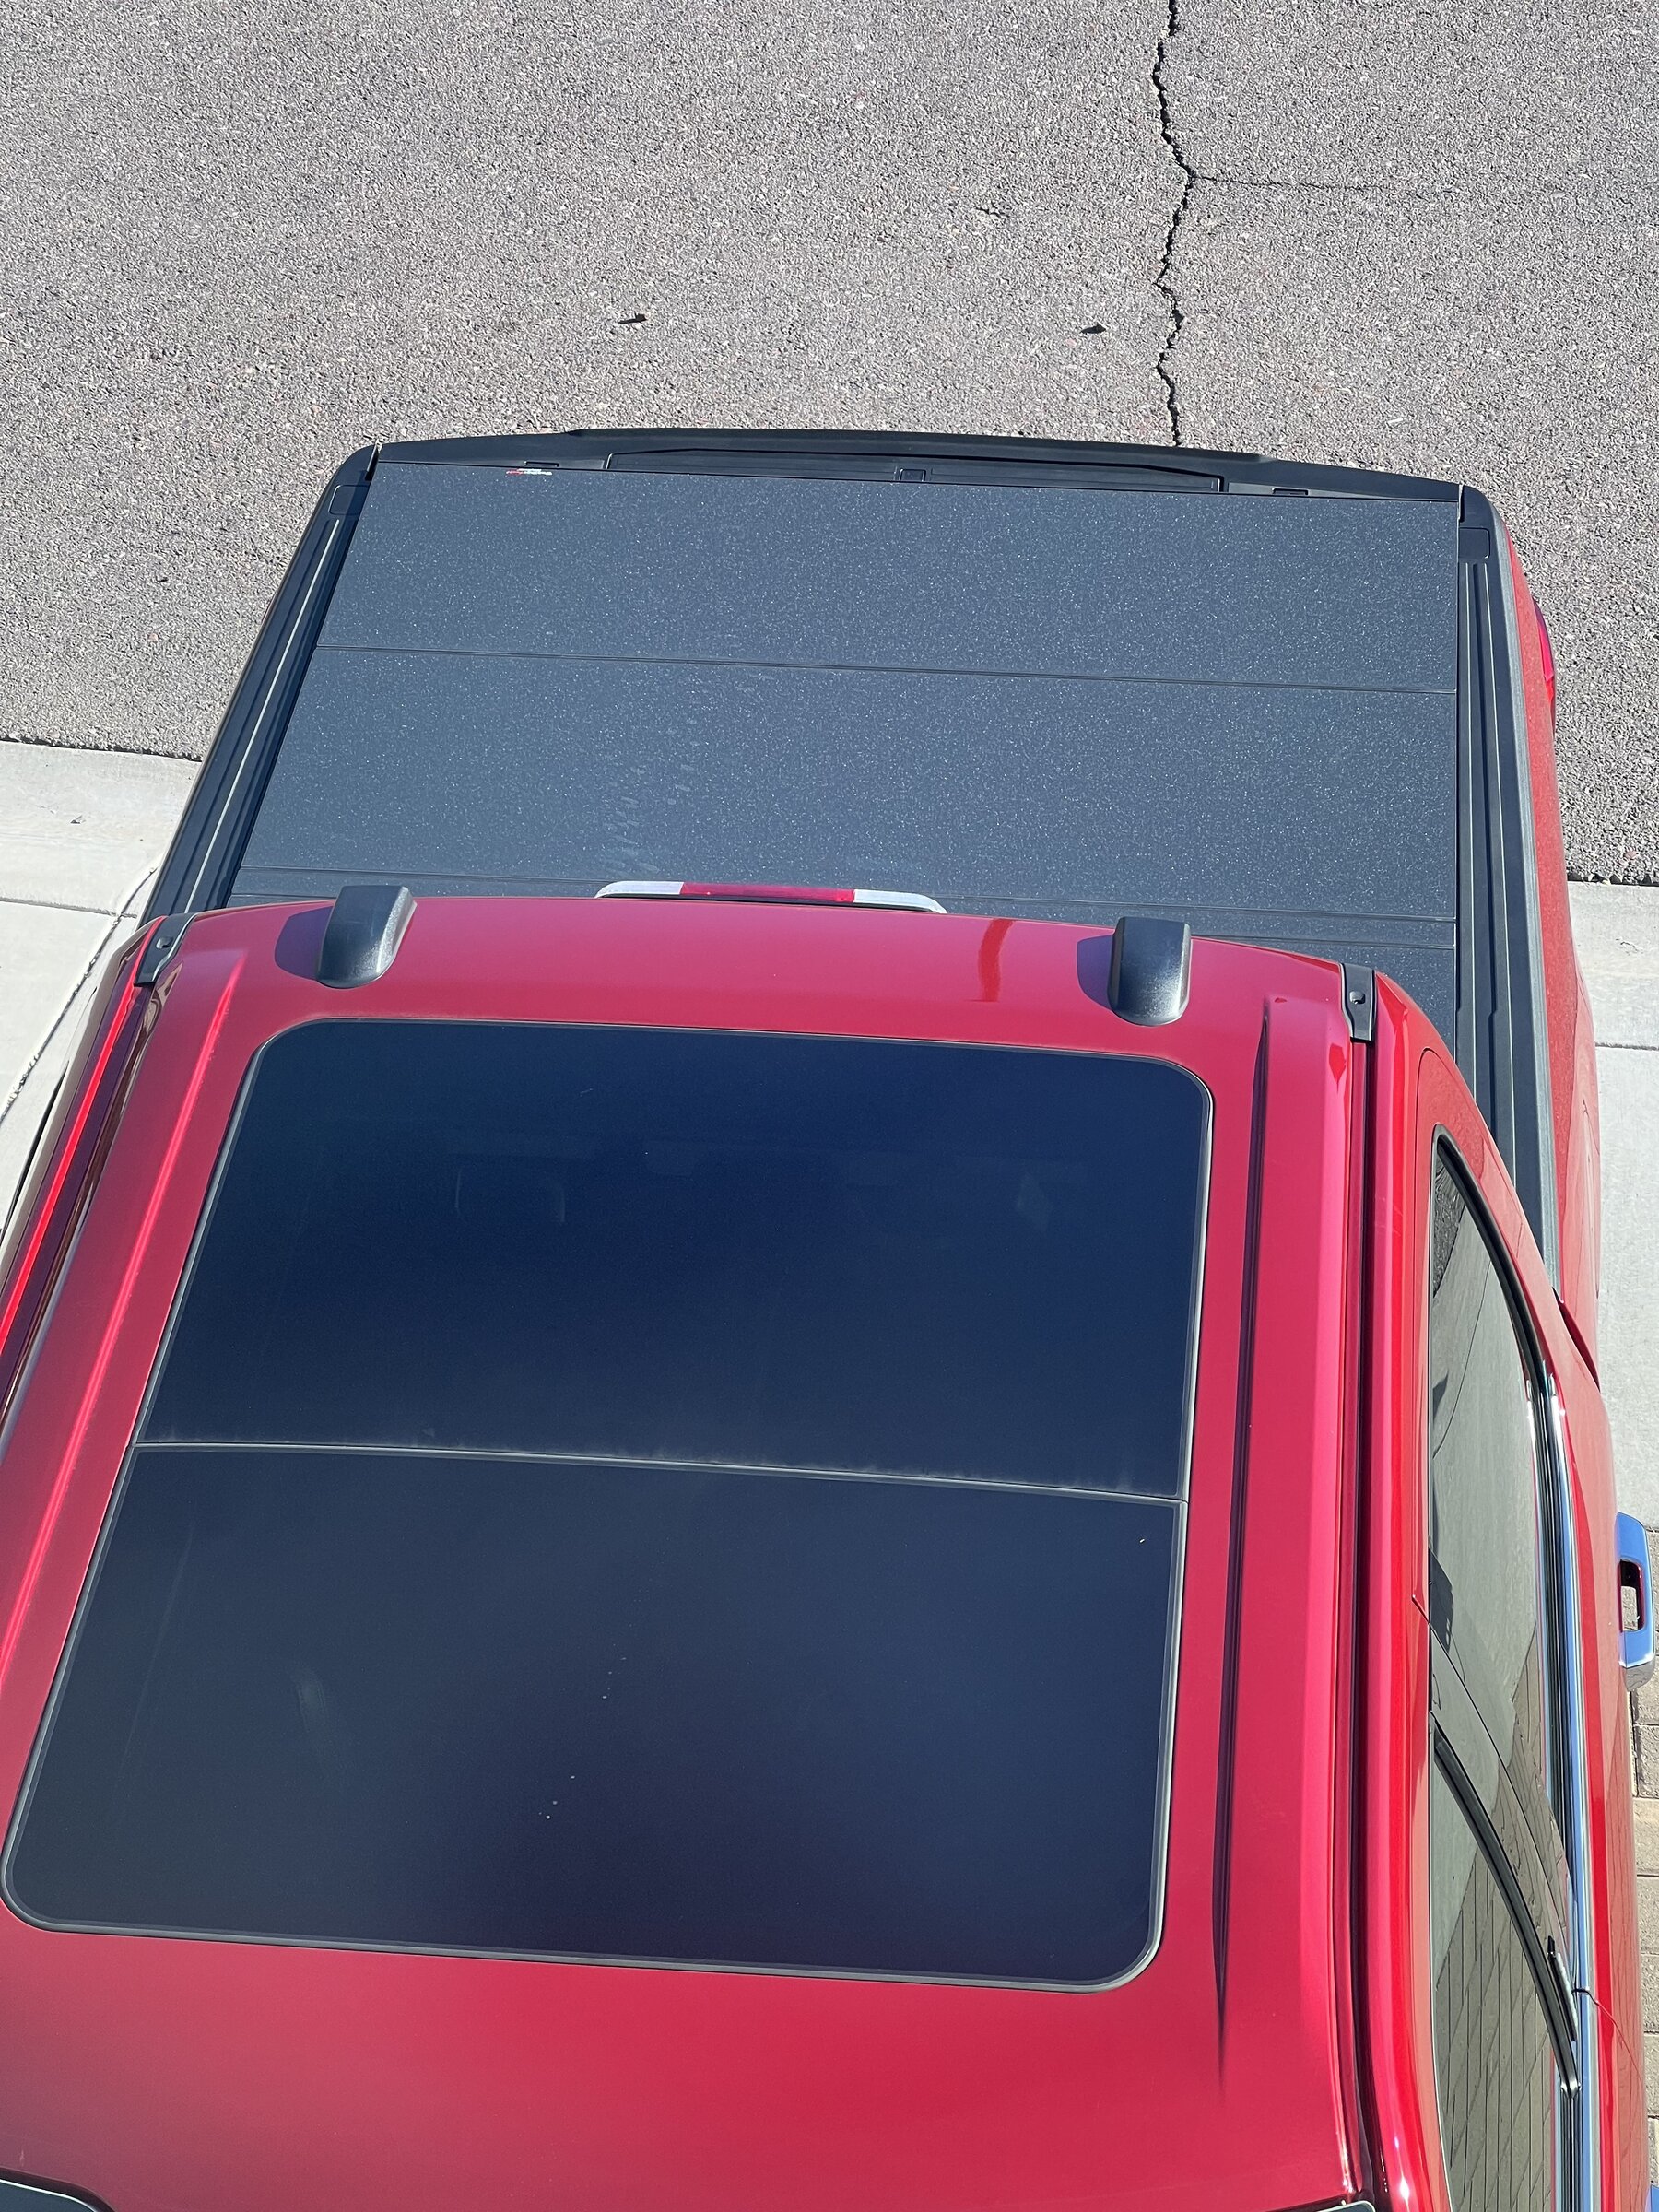 Ford F-150 Tonneau Covers - Recommendations and Reviews 893F5131-F928-45E5-ABFB-58FFA1218D21